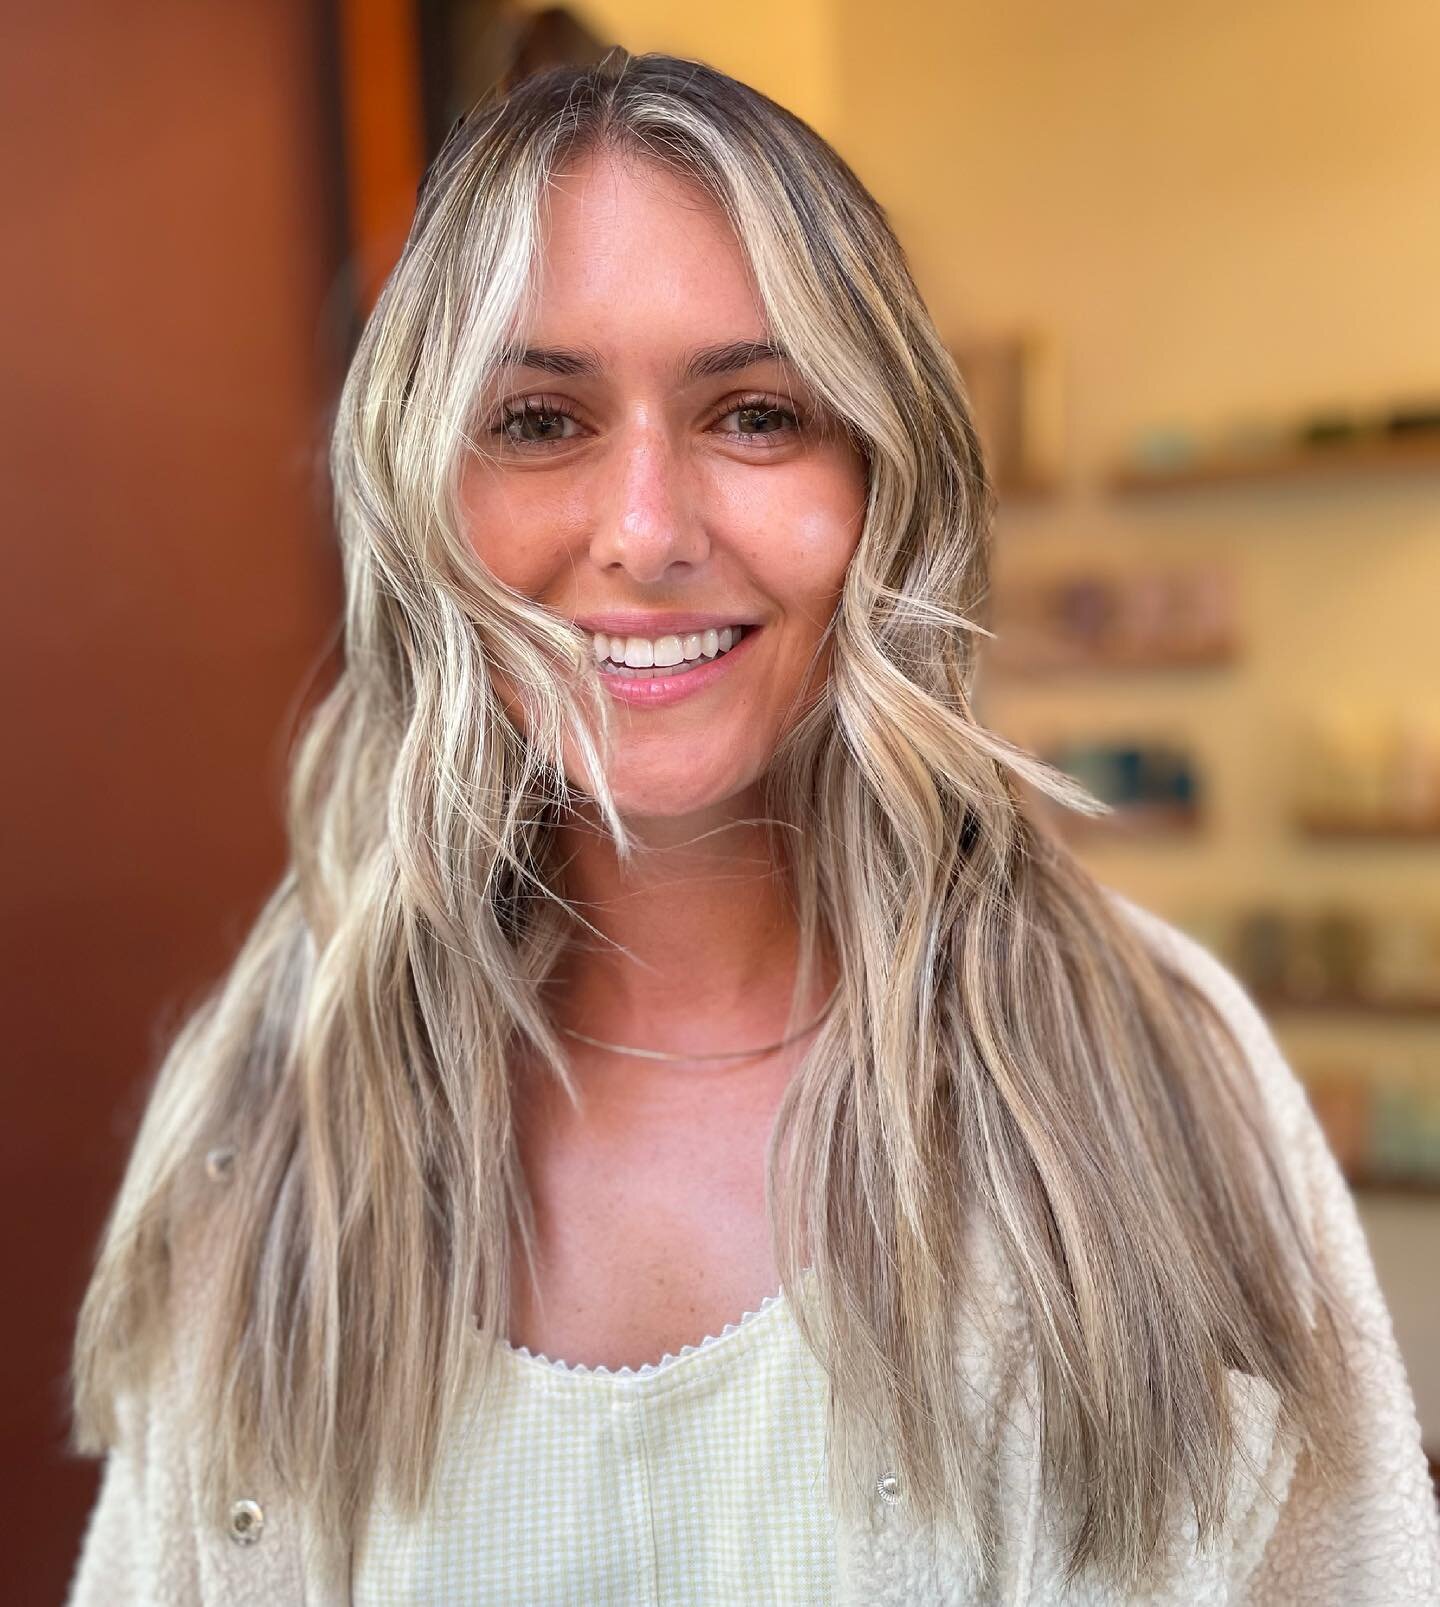 Bright &amp; beautiful 🤩
.
.
Text or DM me to book an appointment!
.
.
503.560.6363
.
.
#hairbyruthstrauss #coteriesalonpdx #portlandhairstylist #pdxhairstylist #behindthechair #balayage #balayagist #bestofbalayage